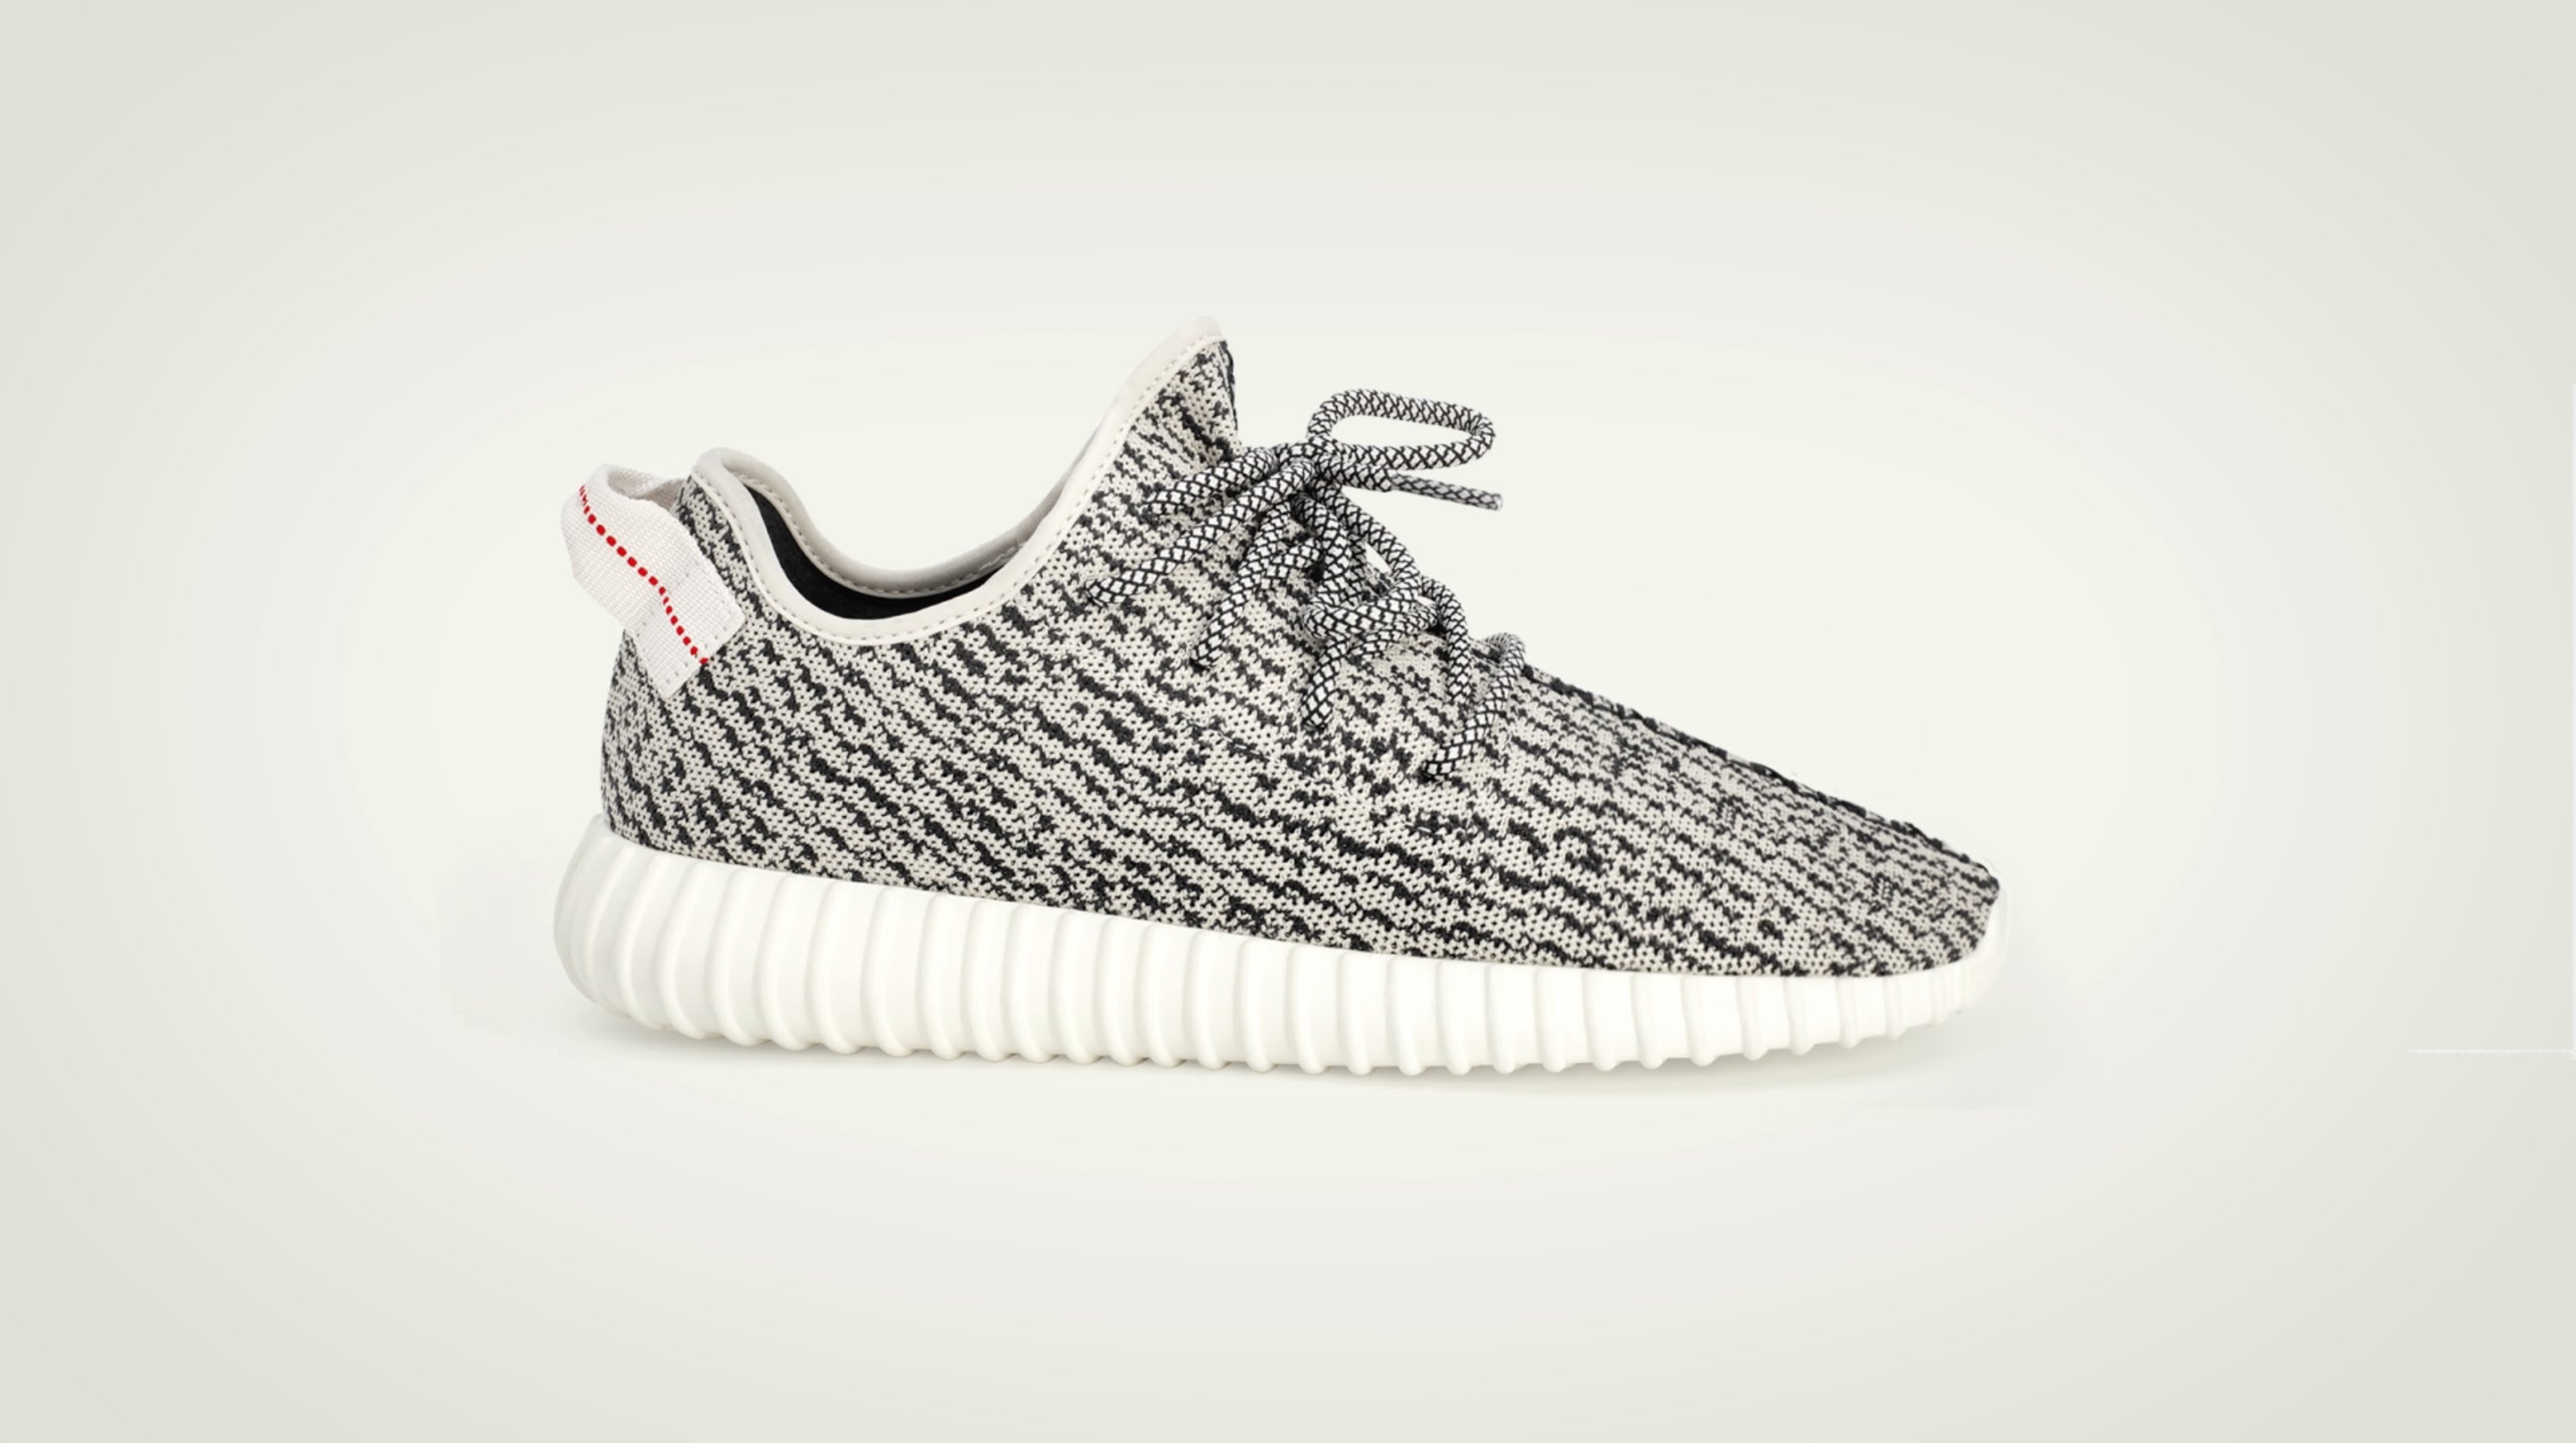 Choose your Yeezys — $12 knockoffs or 